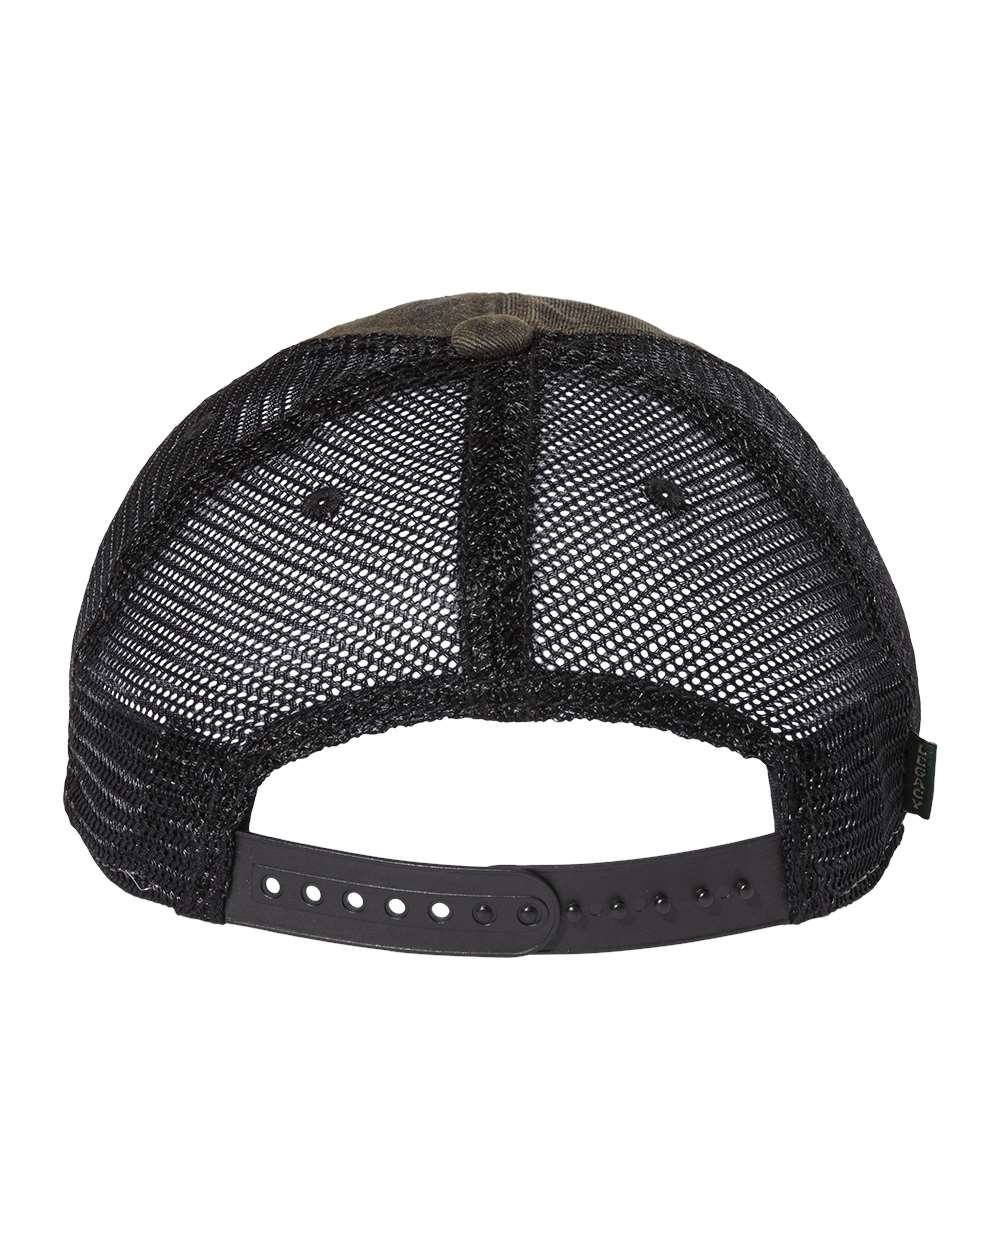 Legacy Gamecock Equestrian - Unstructured Hat - Black/Black